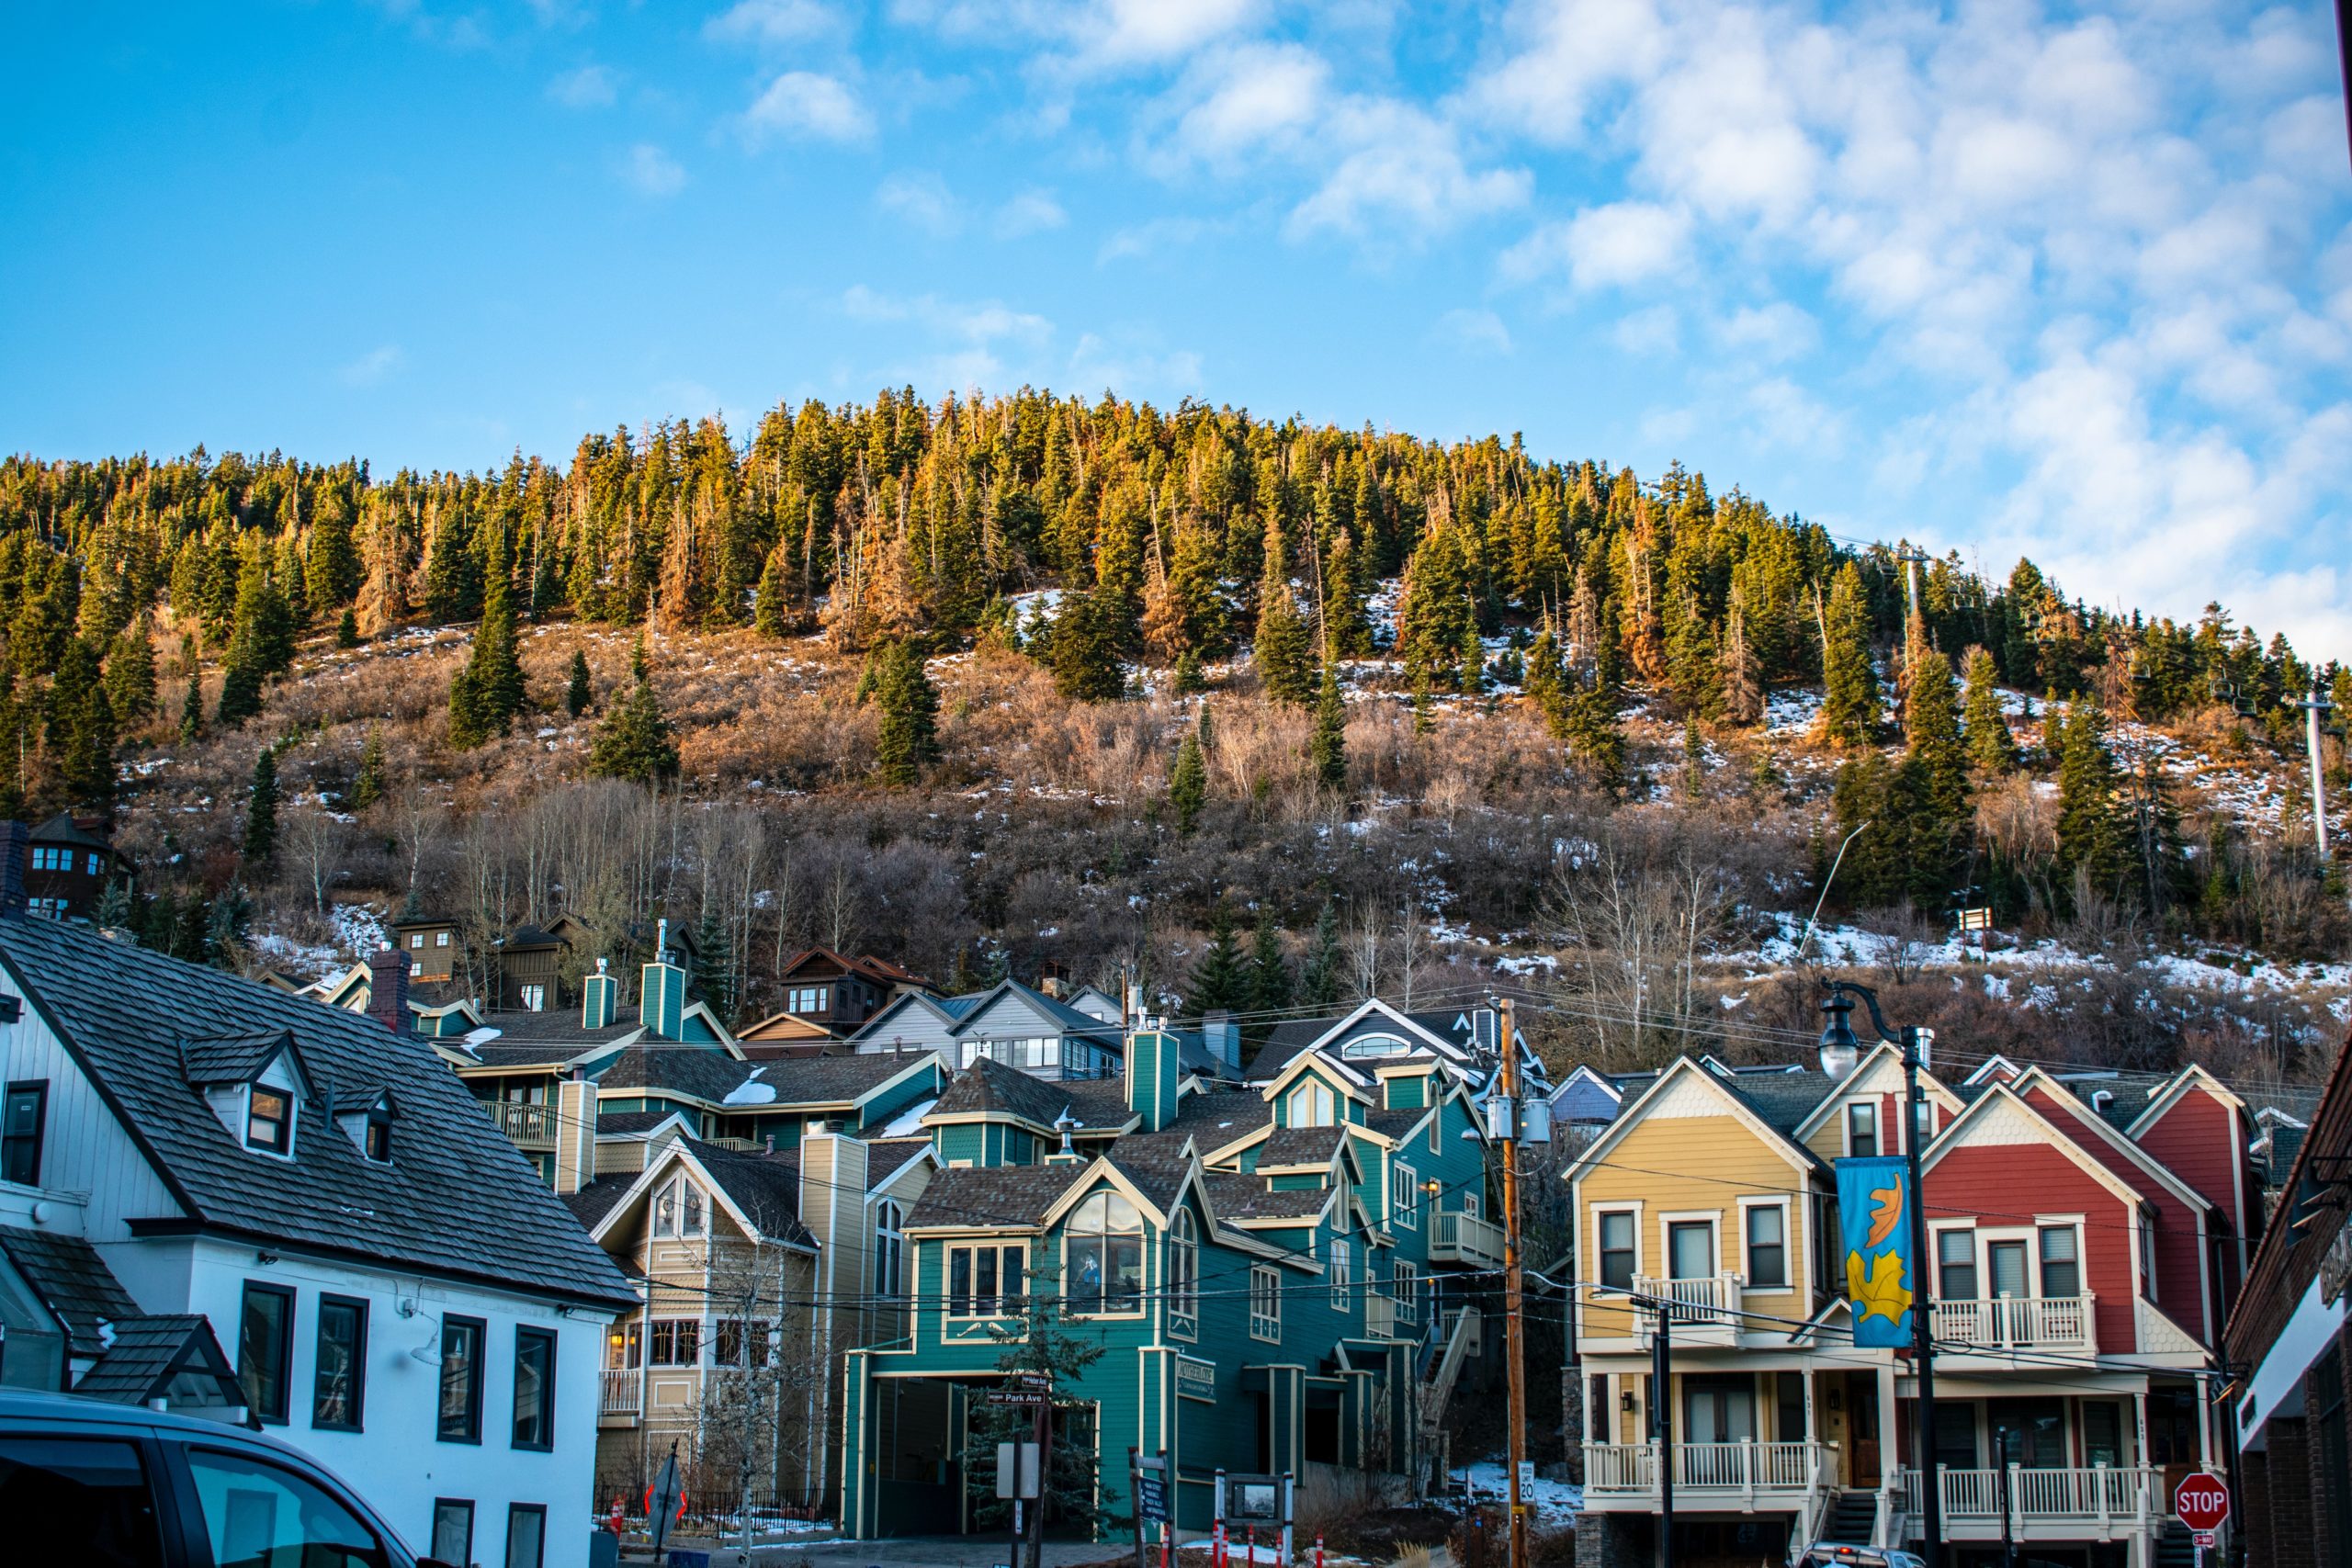 Most Photographable Places in Park City